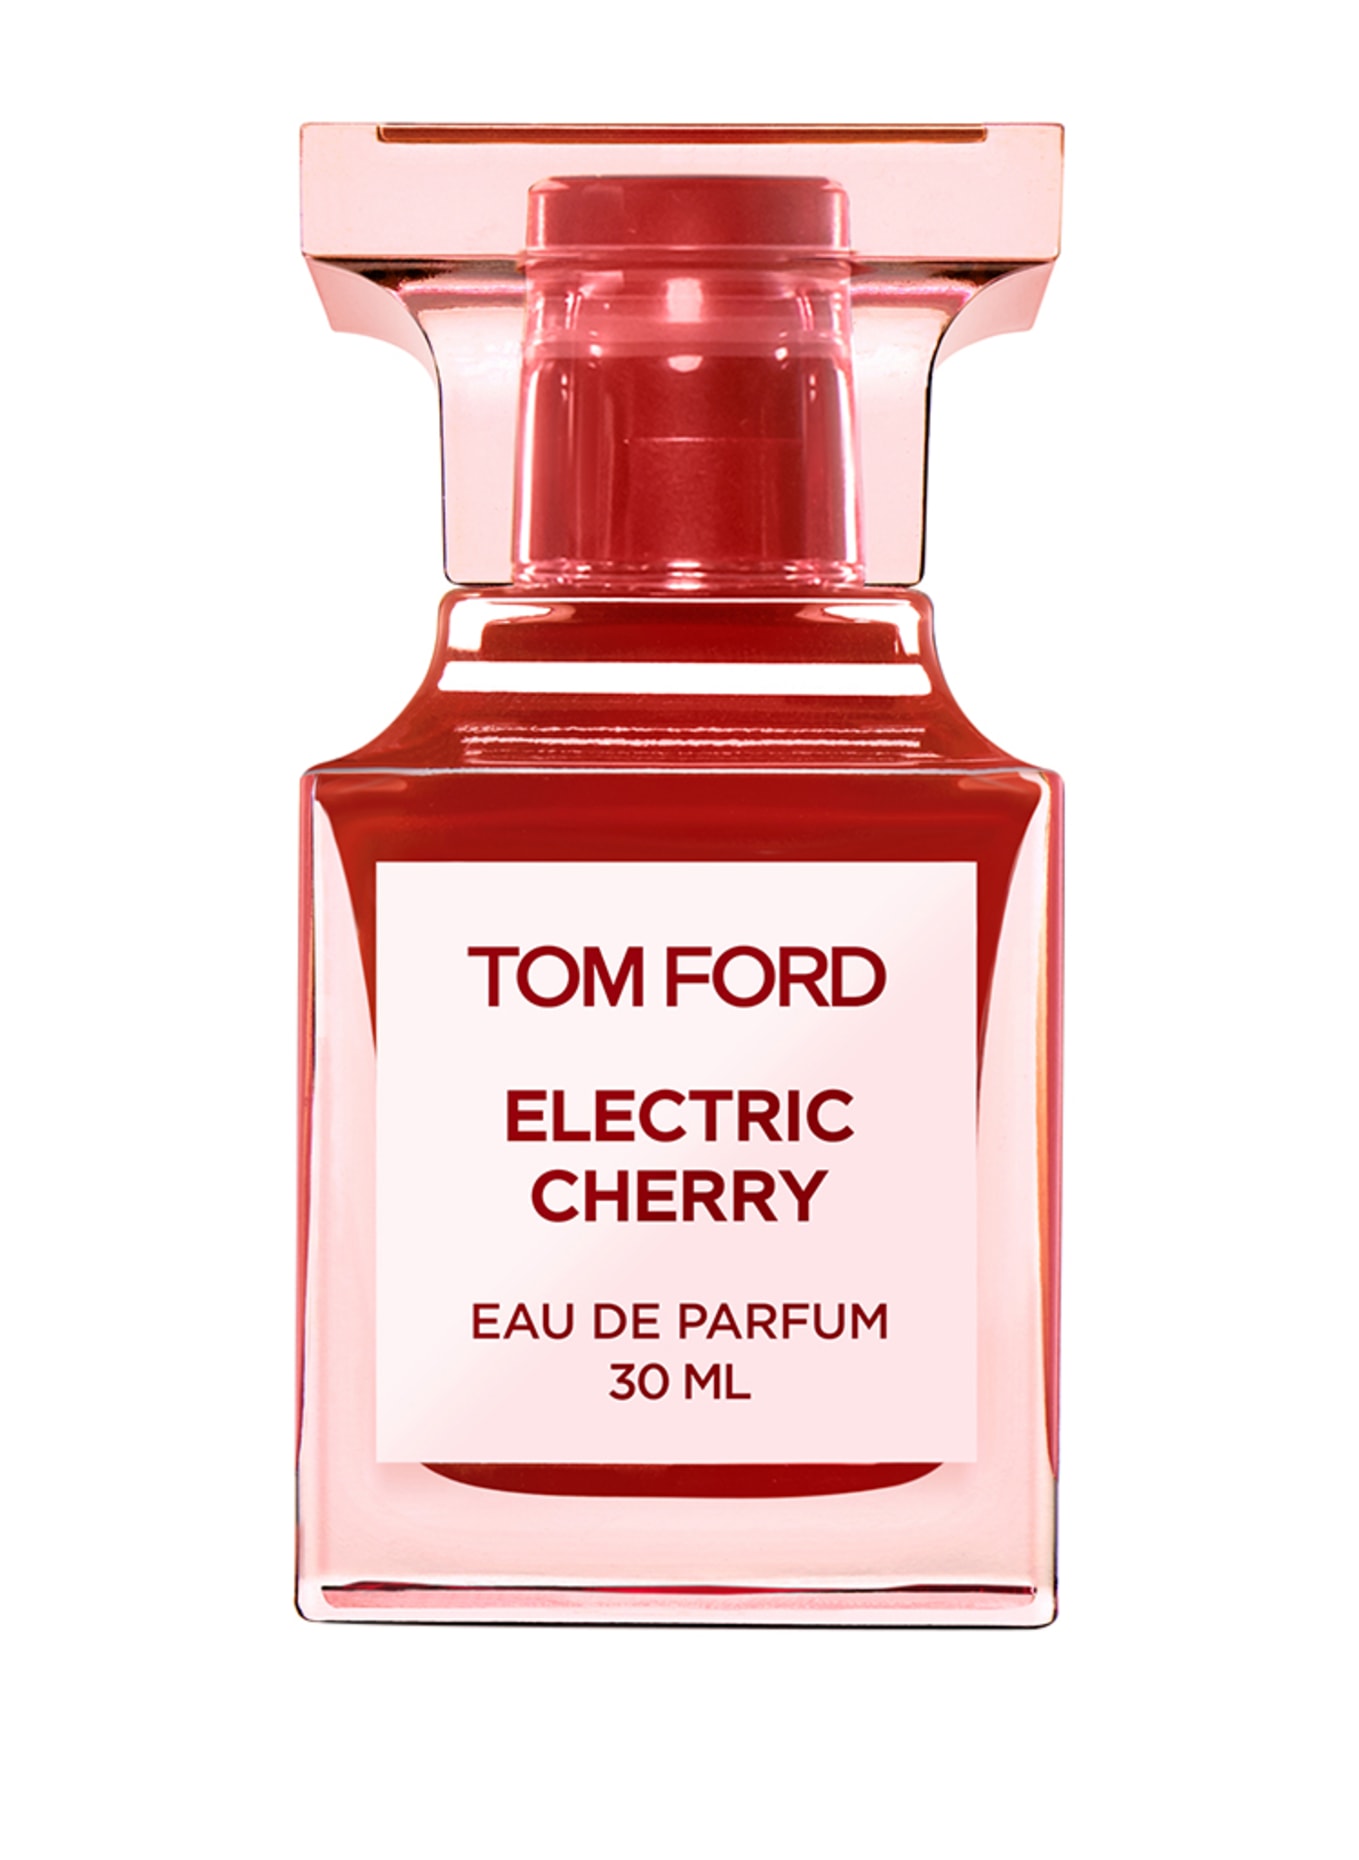 TOM FORD BEAUTY ELECTRIC CHERRY(Bild null)